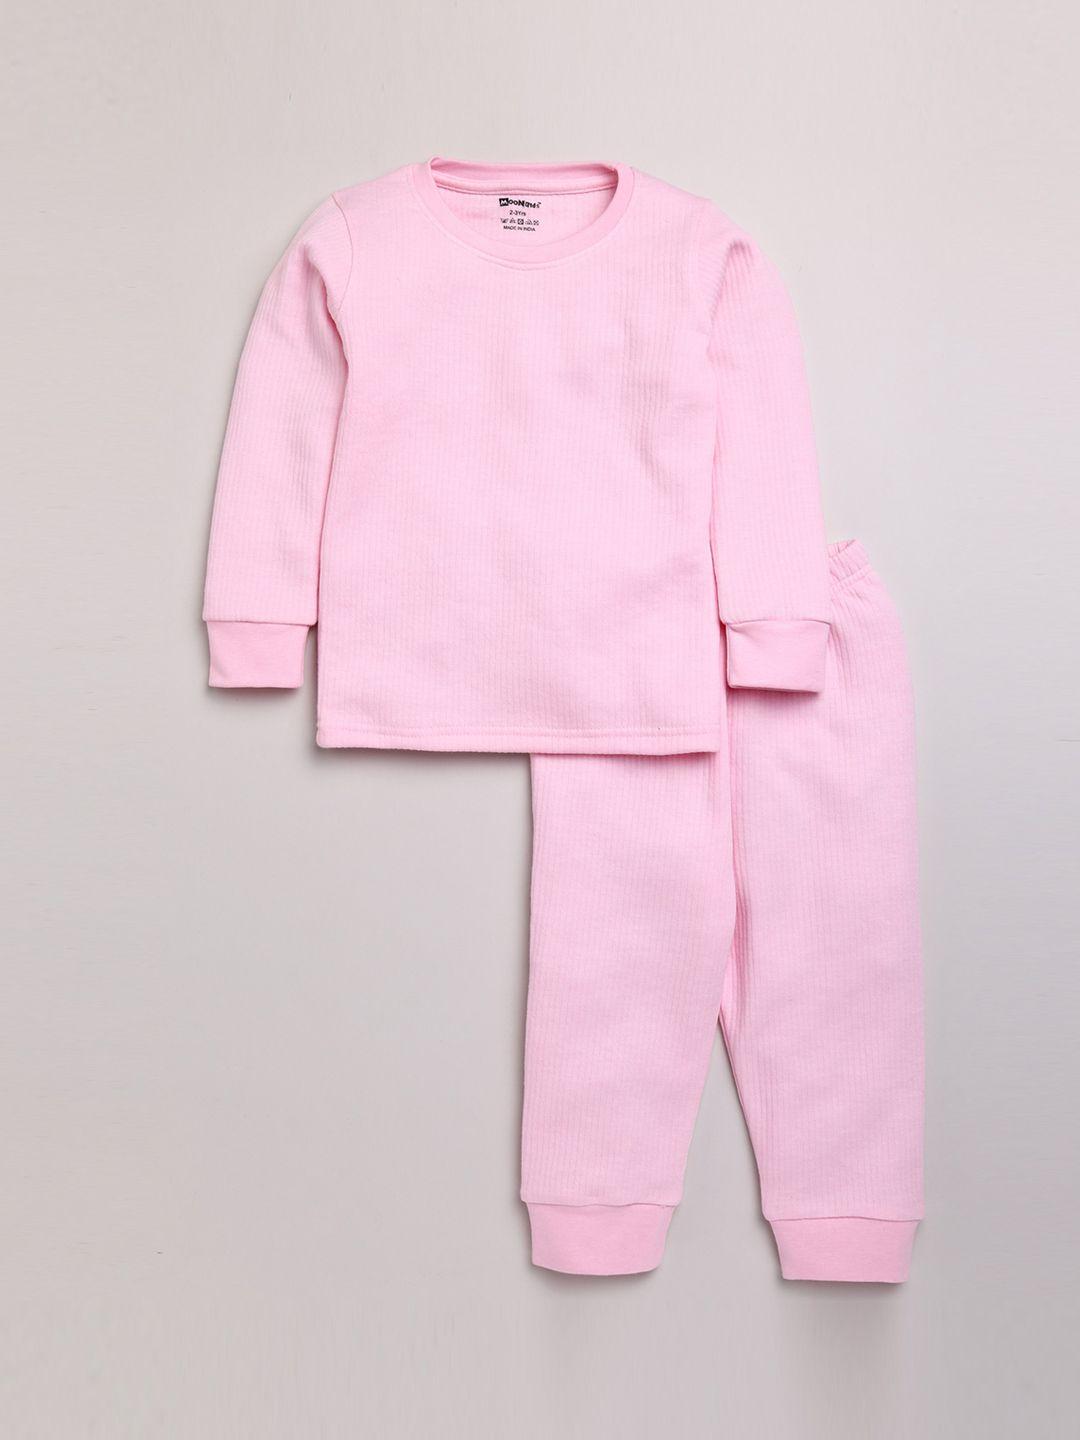 moonkids boys pink solid cotton thermal set